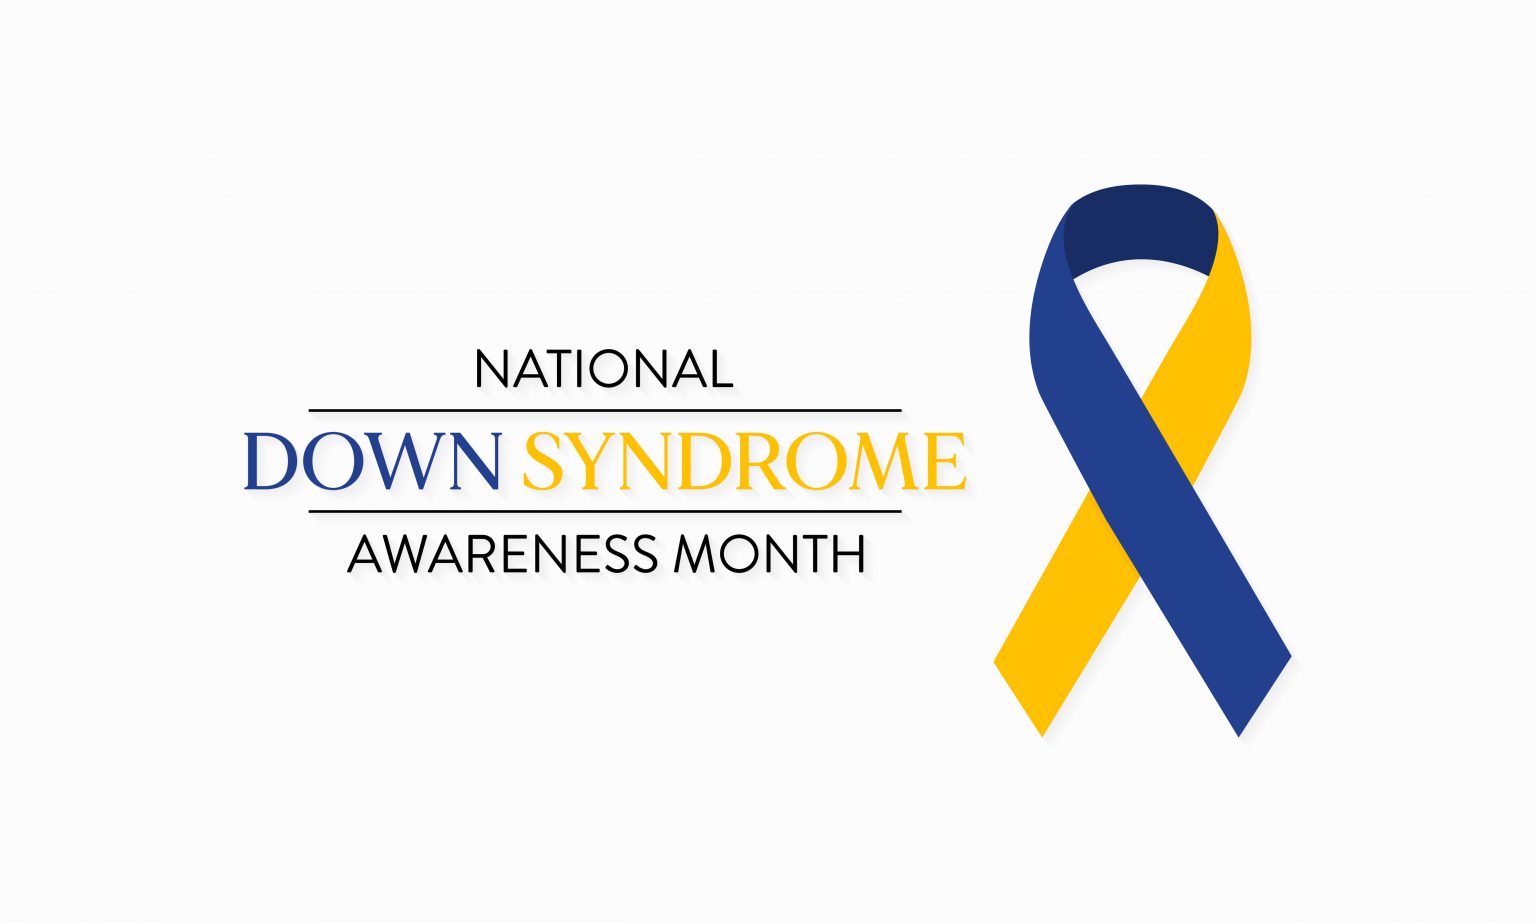 Vector illustration on the theme of National Down Syndrome awareness